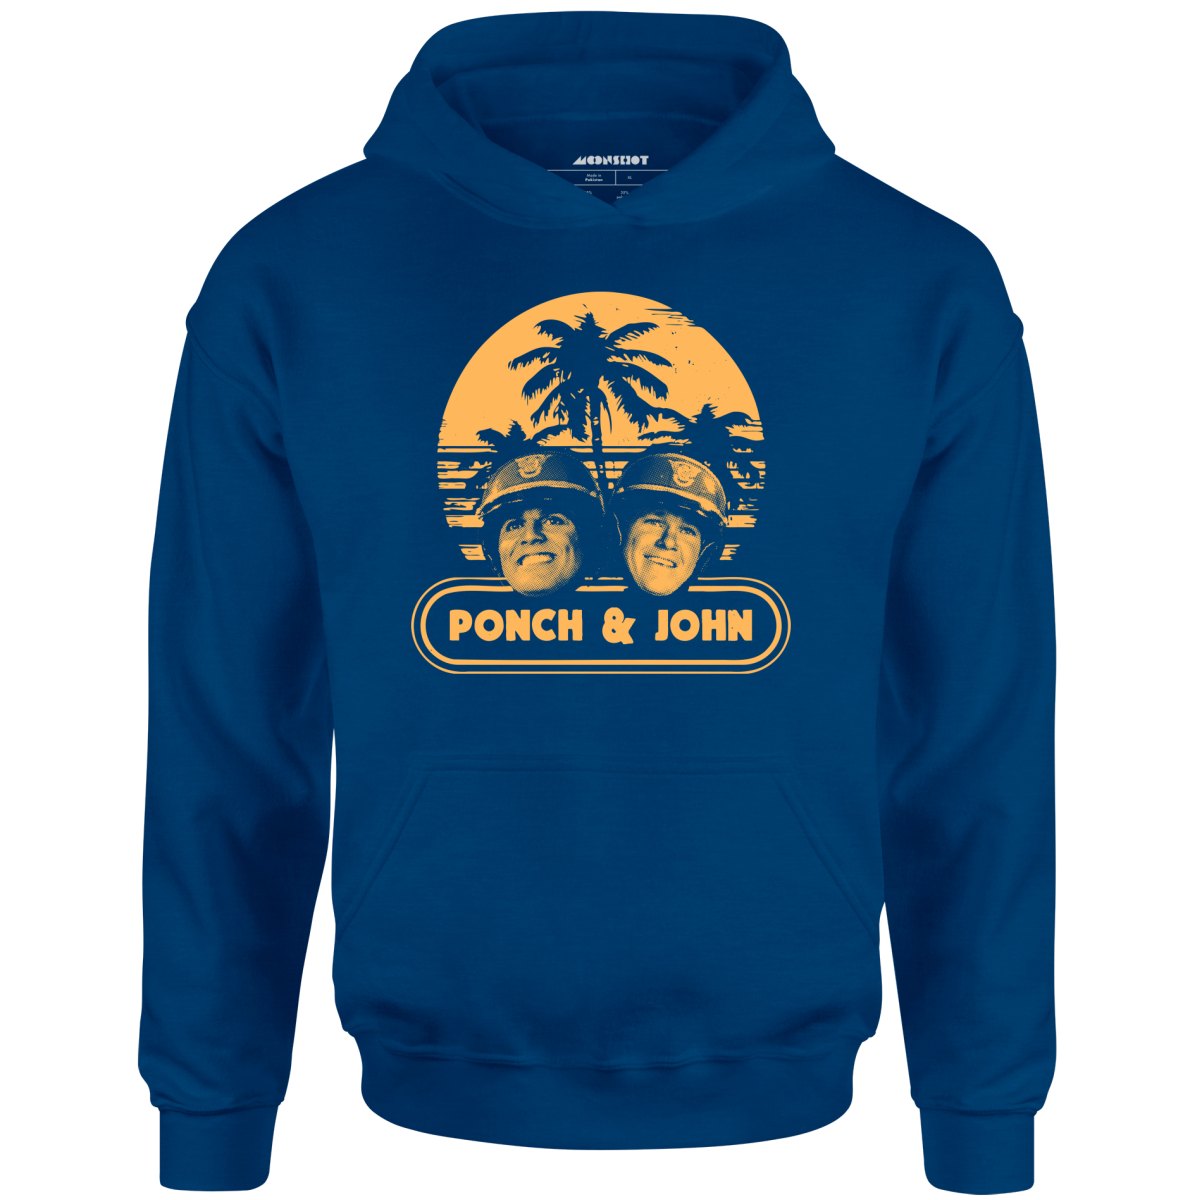 Ponch and John - Unisex Hoodie